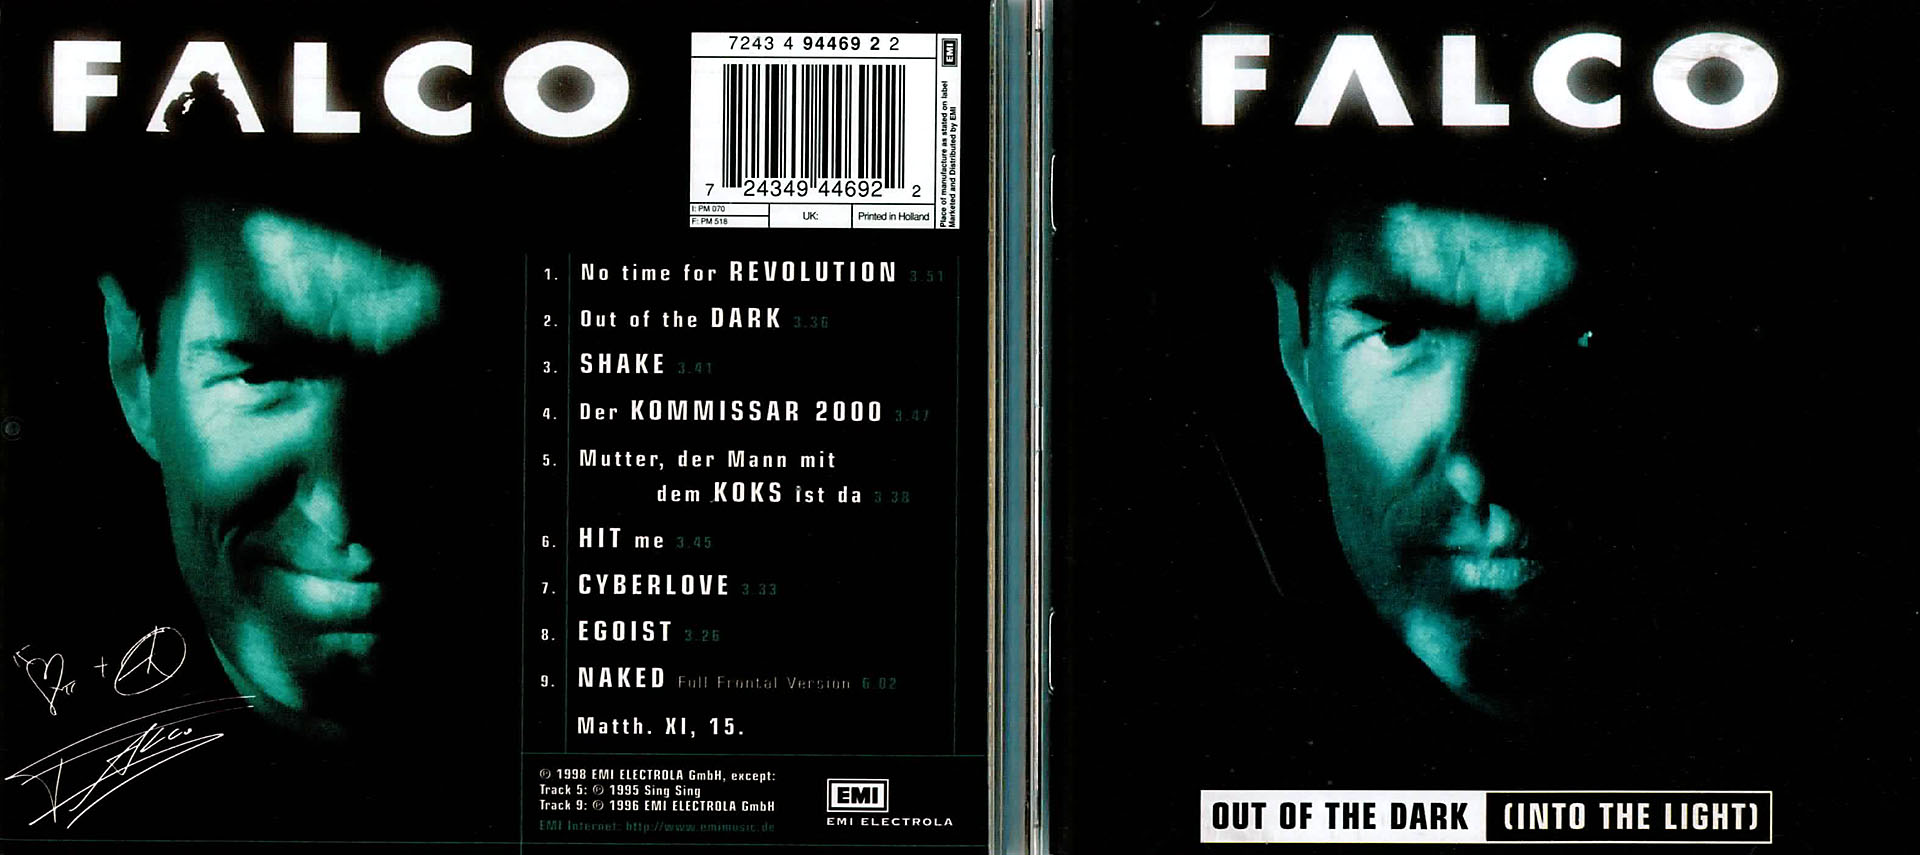 Out Of The Dark (Into The Light) - Falco